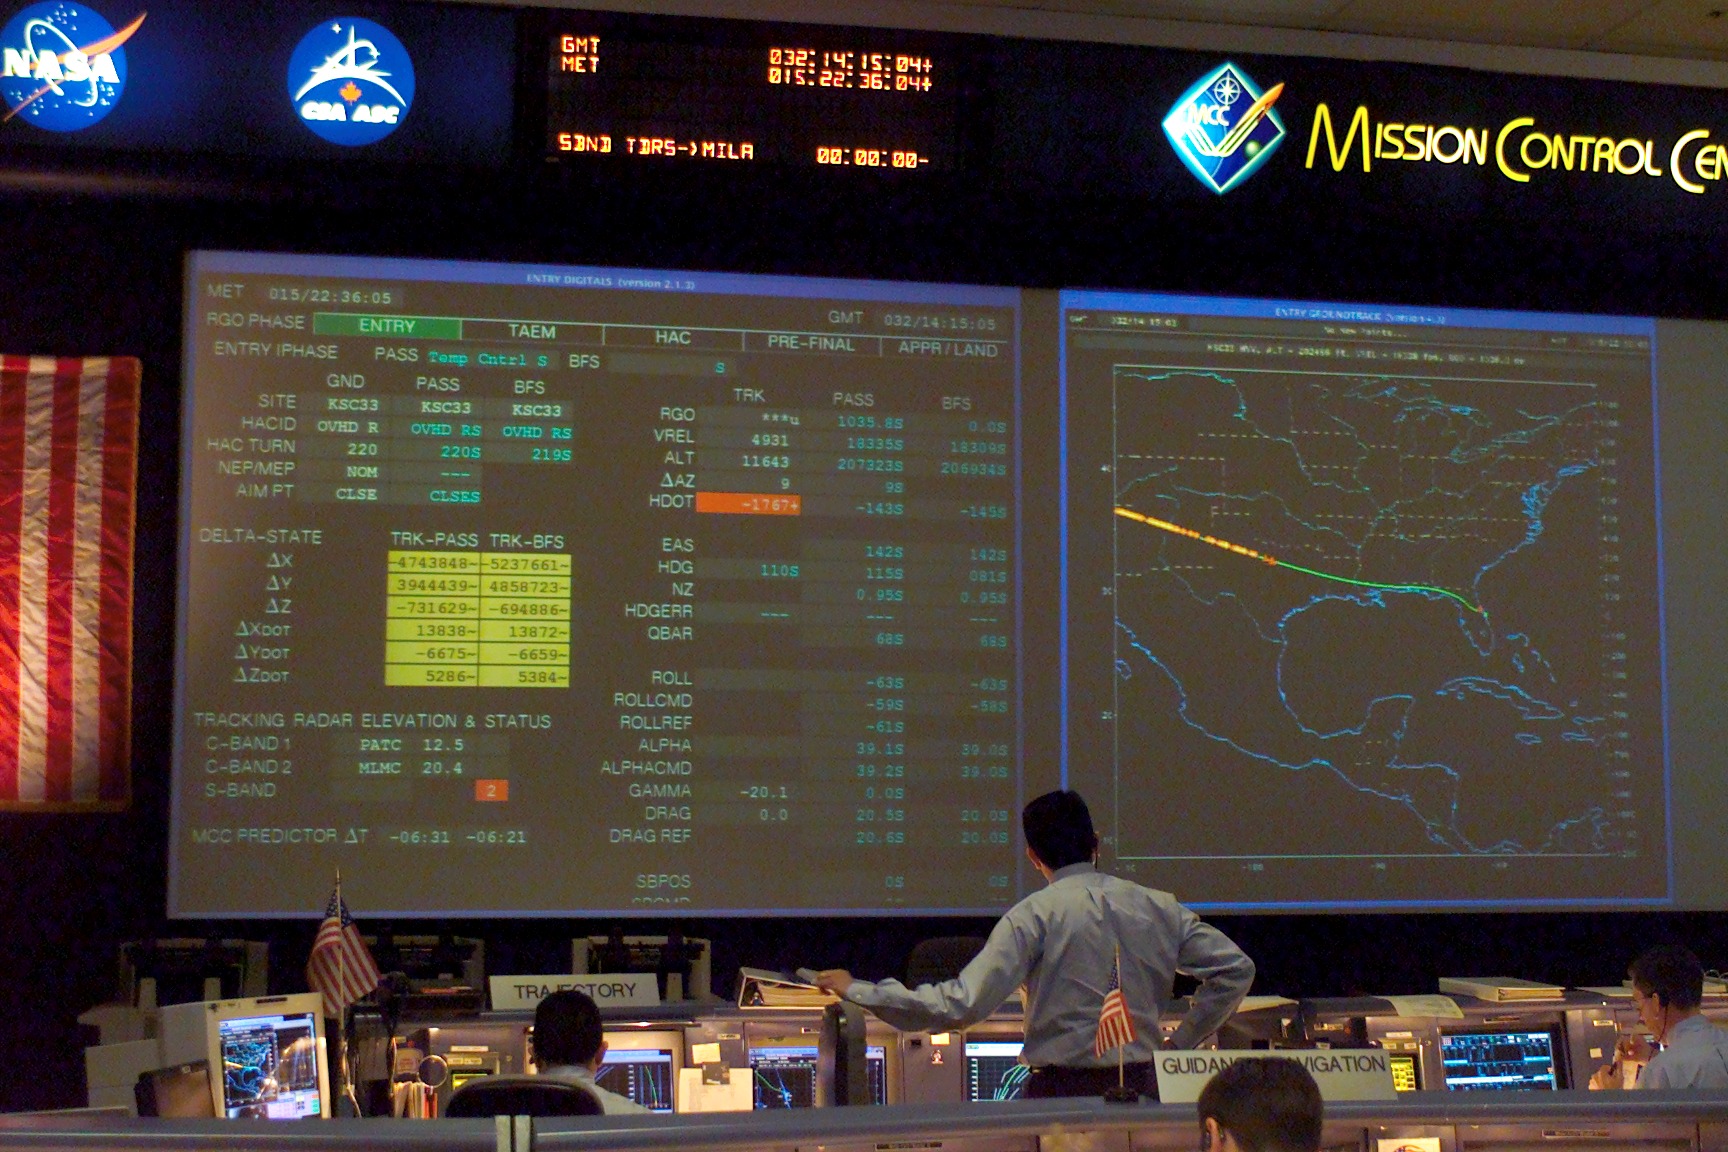 As evidenced by the clock on the main screen at 14:15:05 GMT (9:15:05 am EST), this view of a tense Mission Control was acquired a quarter of an hour after the first sign of trouble...and a minute ahead of Columbia's expected landing. By now, everyone was aware that all hope was gone and contingency procedures were in effect. Photo Credit: NASA